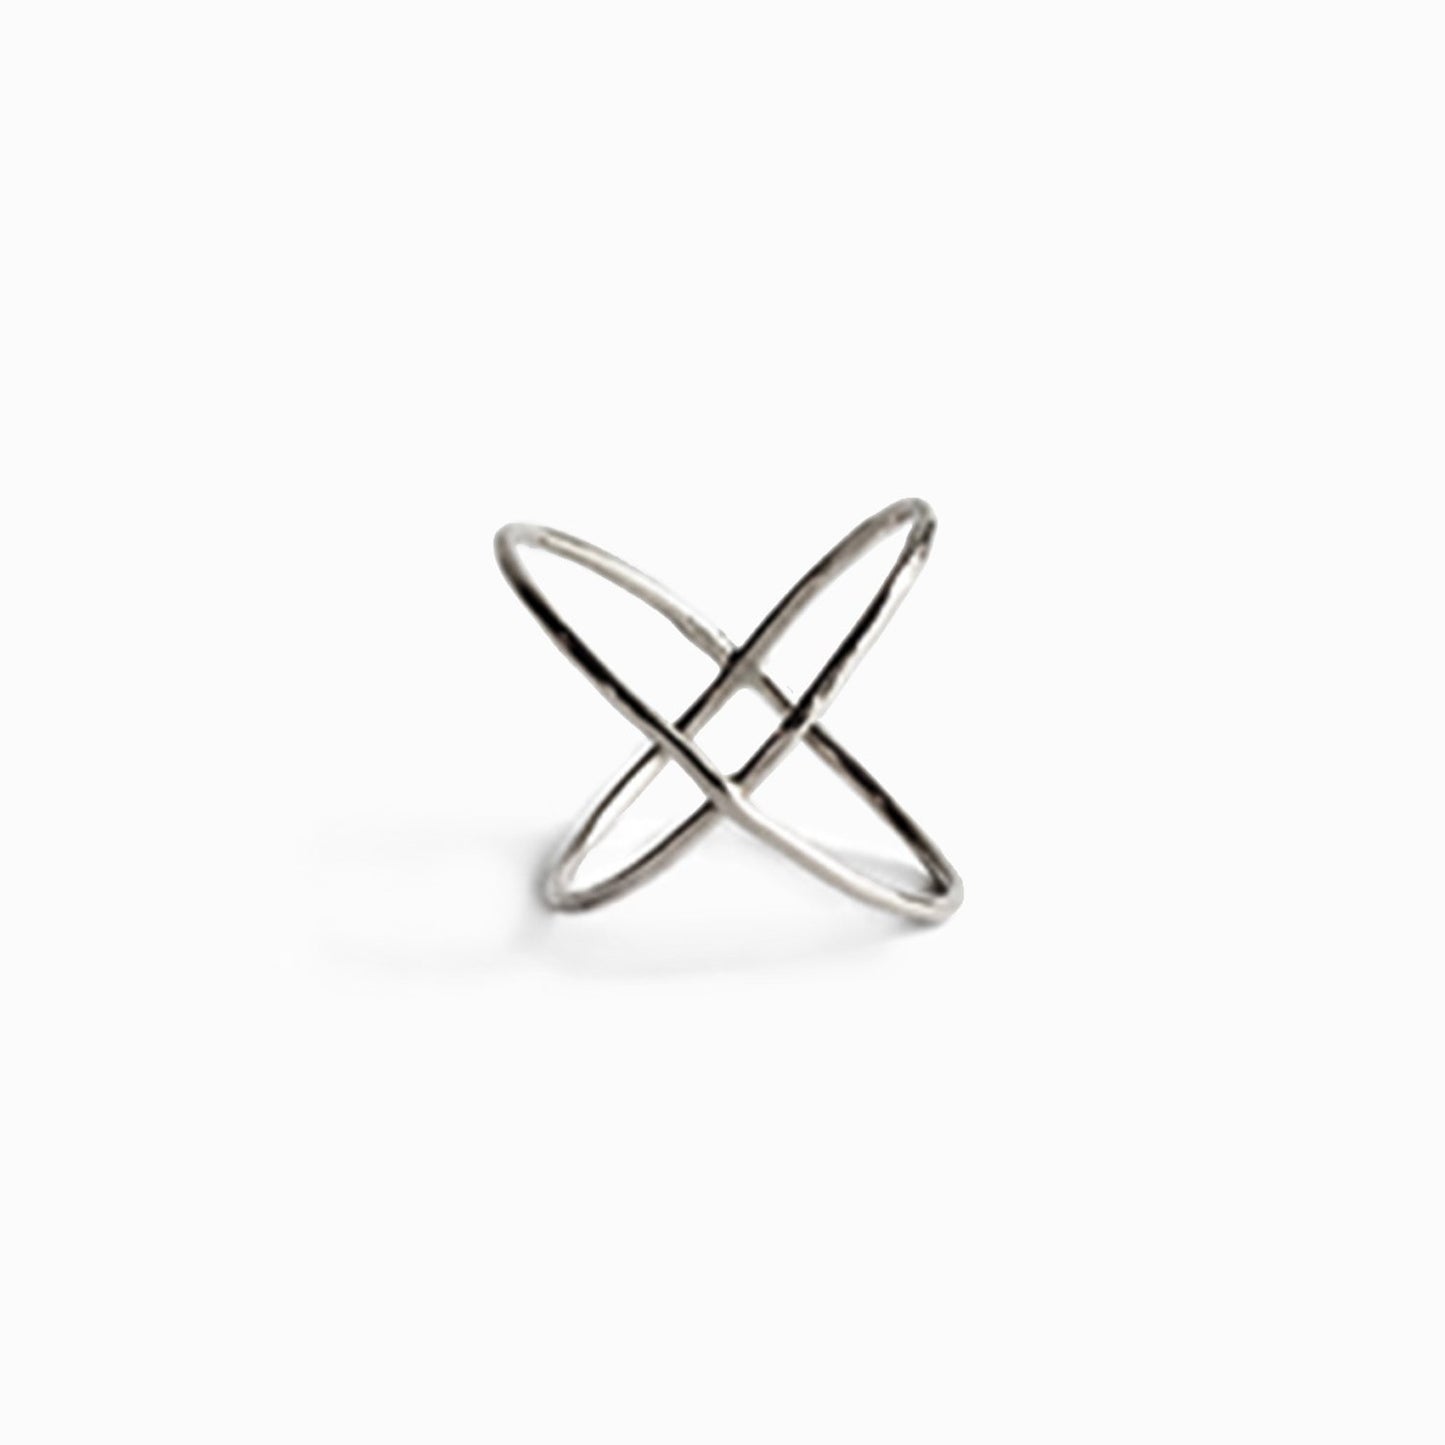 Able Jewelry: X Ring